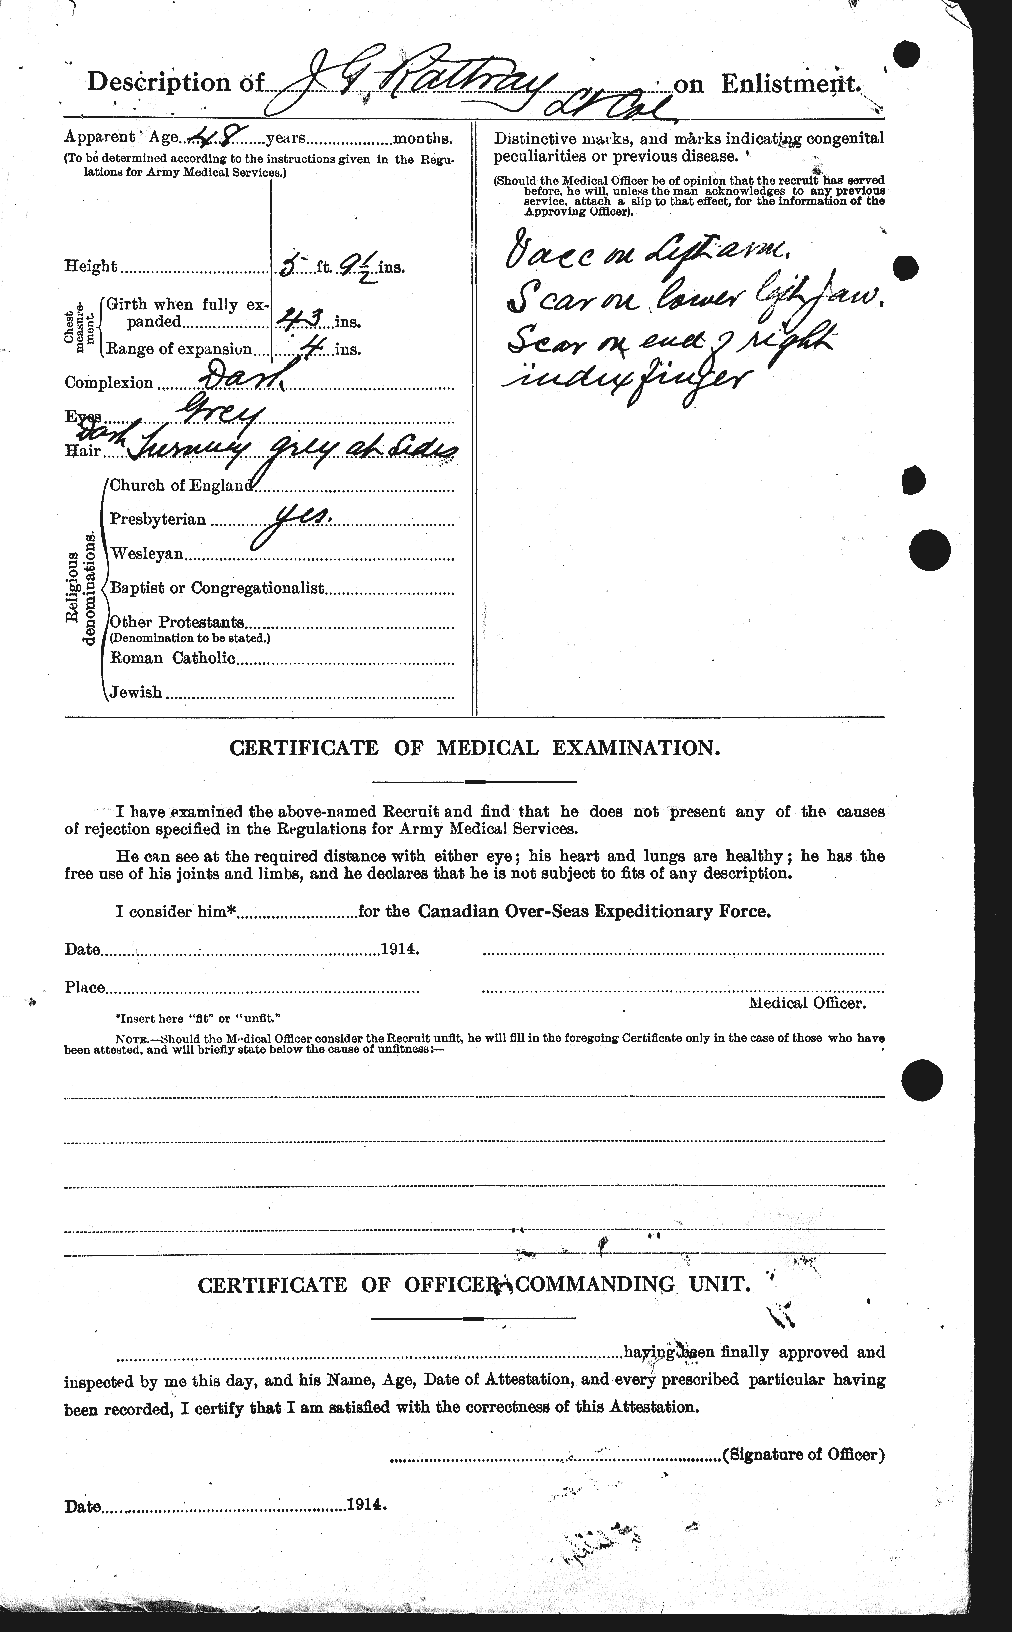 Personnel Records of the First World War - CEF 595702b